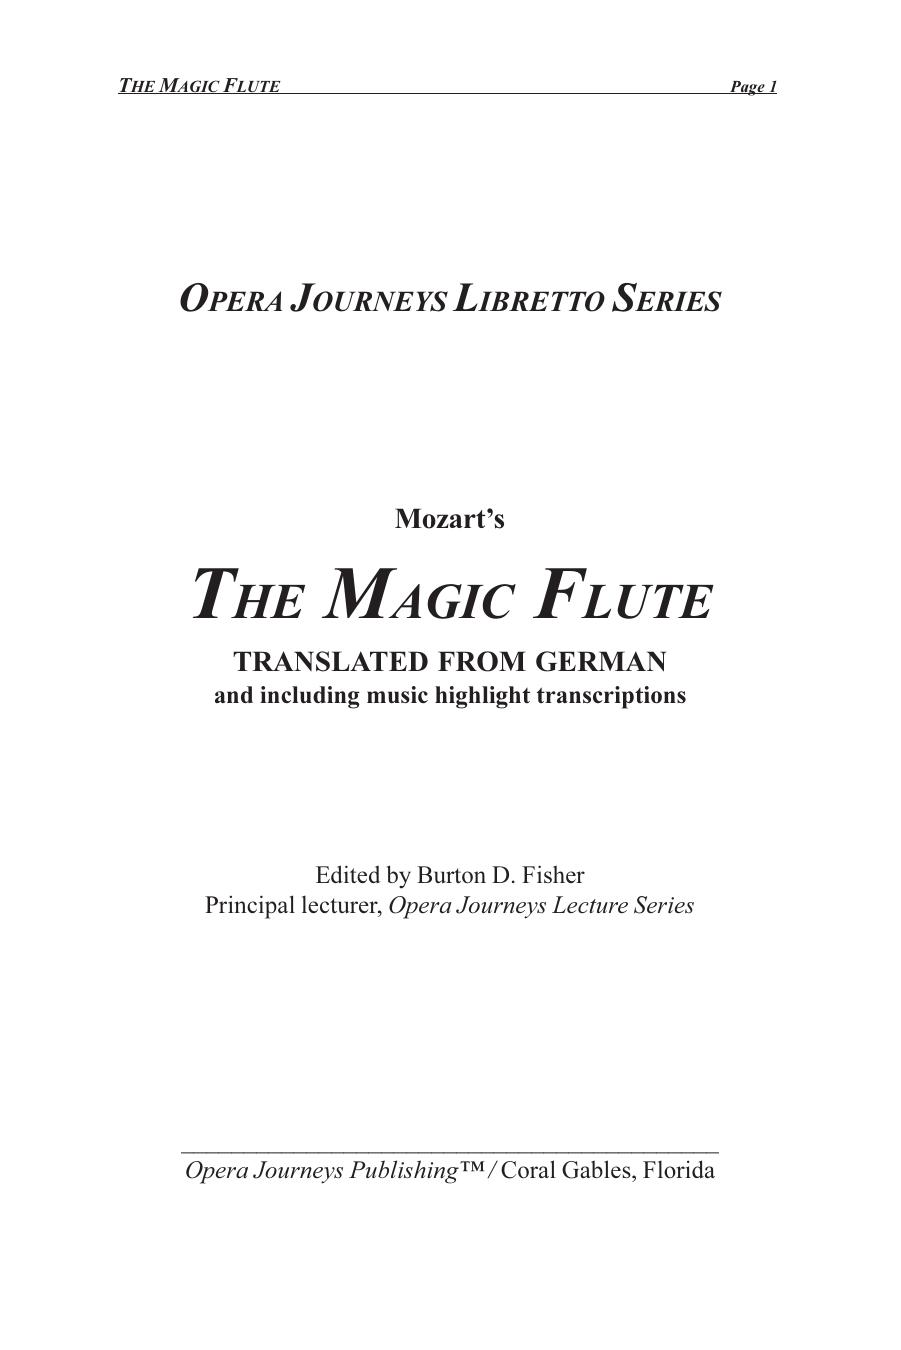 The Magic Flute by Opera Journeys Libretto Series